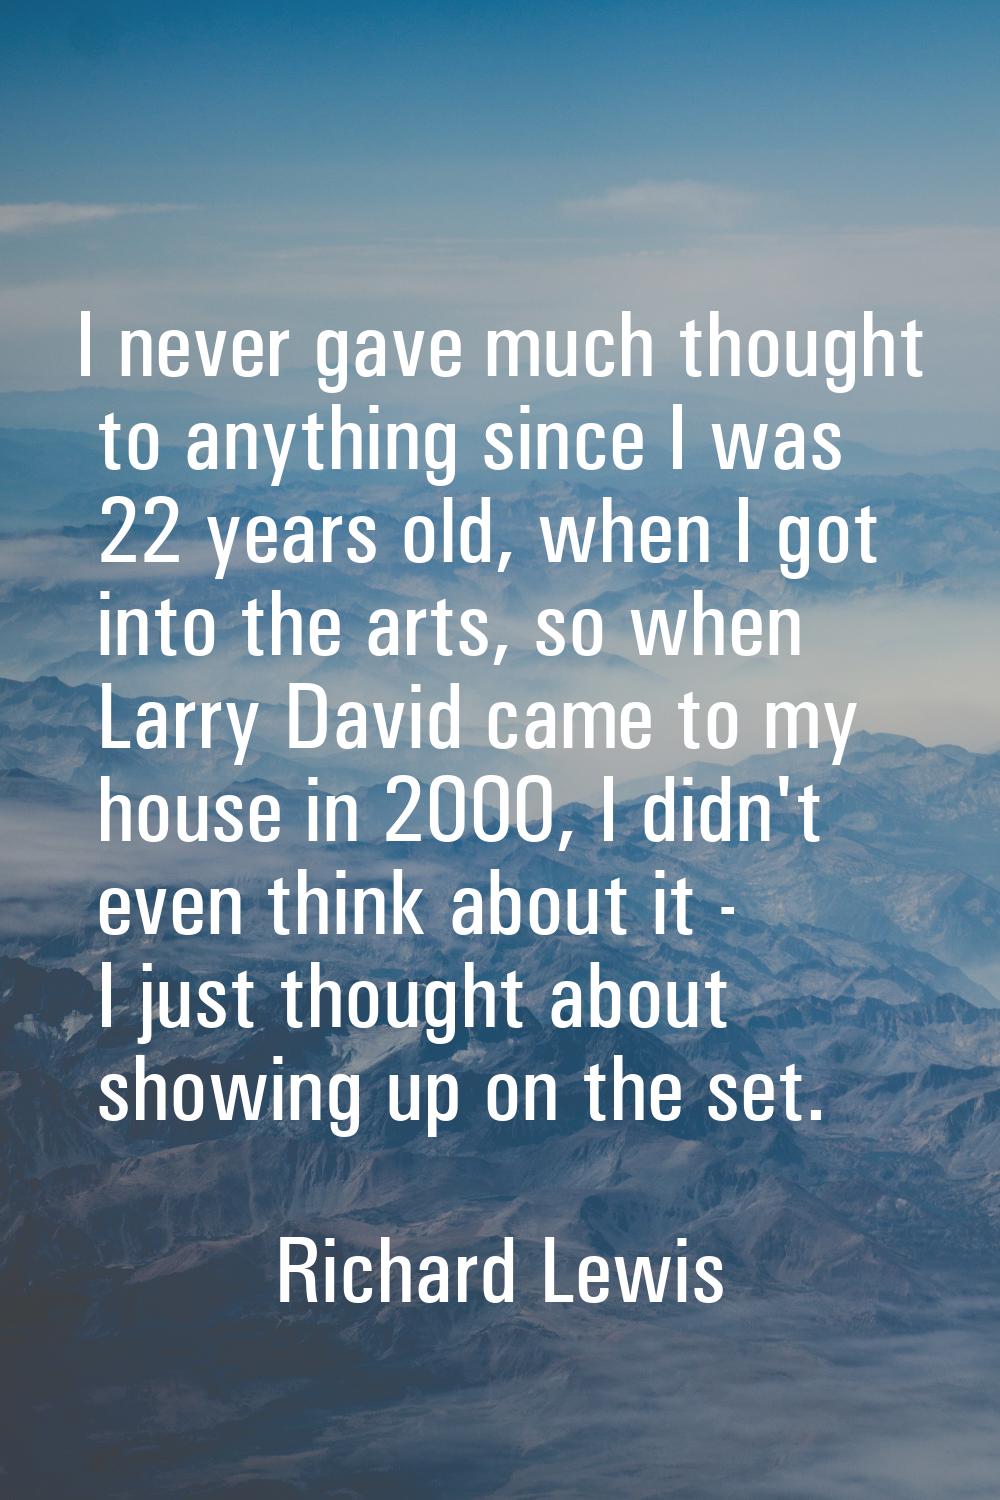 I never gave much thought to anything since I was 22 years old, when I got into the arts, so when L